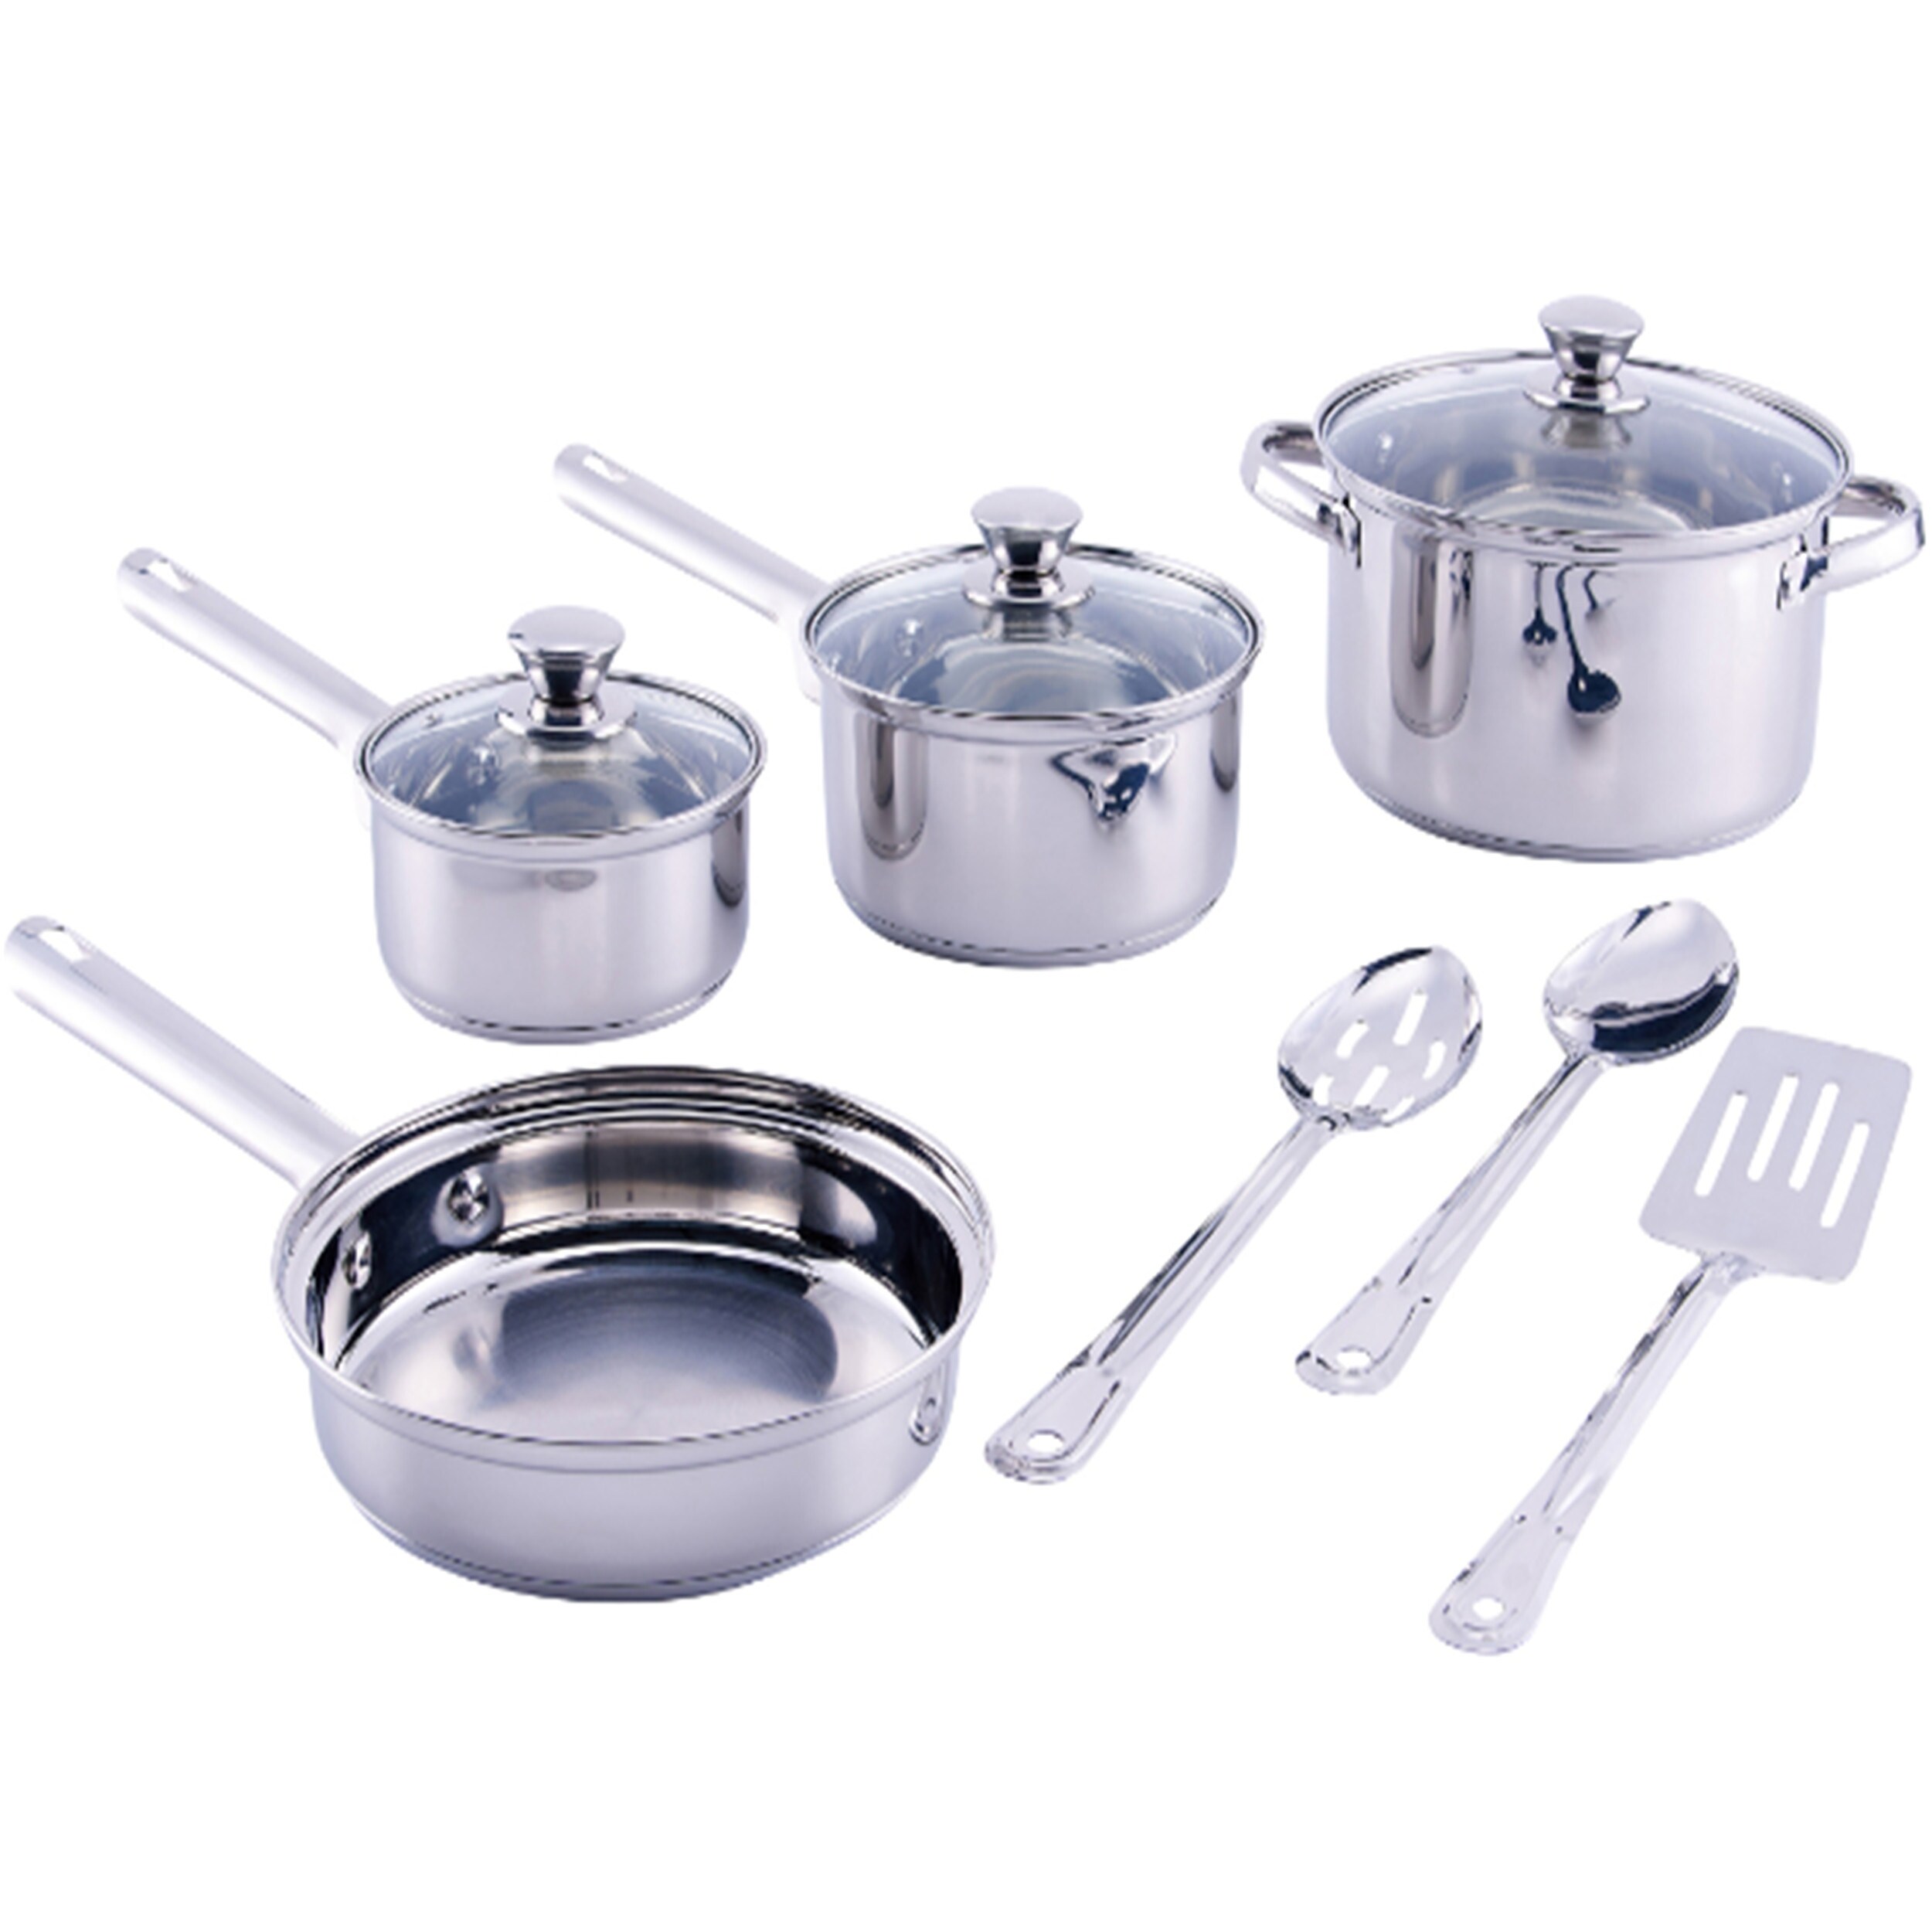 Mainstays Stainless Steel Cookware and Kitchen Combo Set 